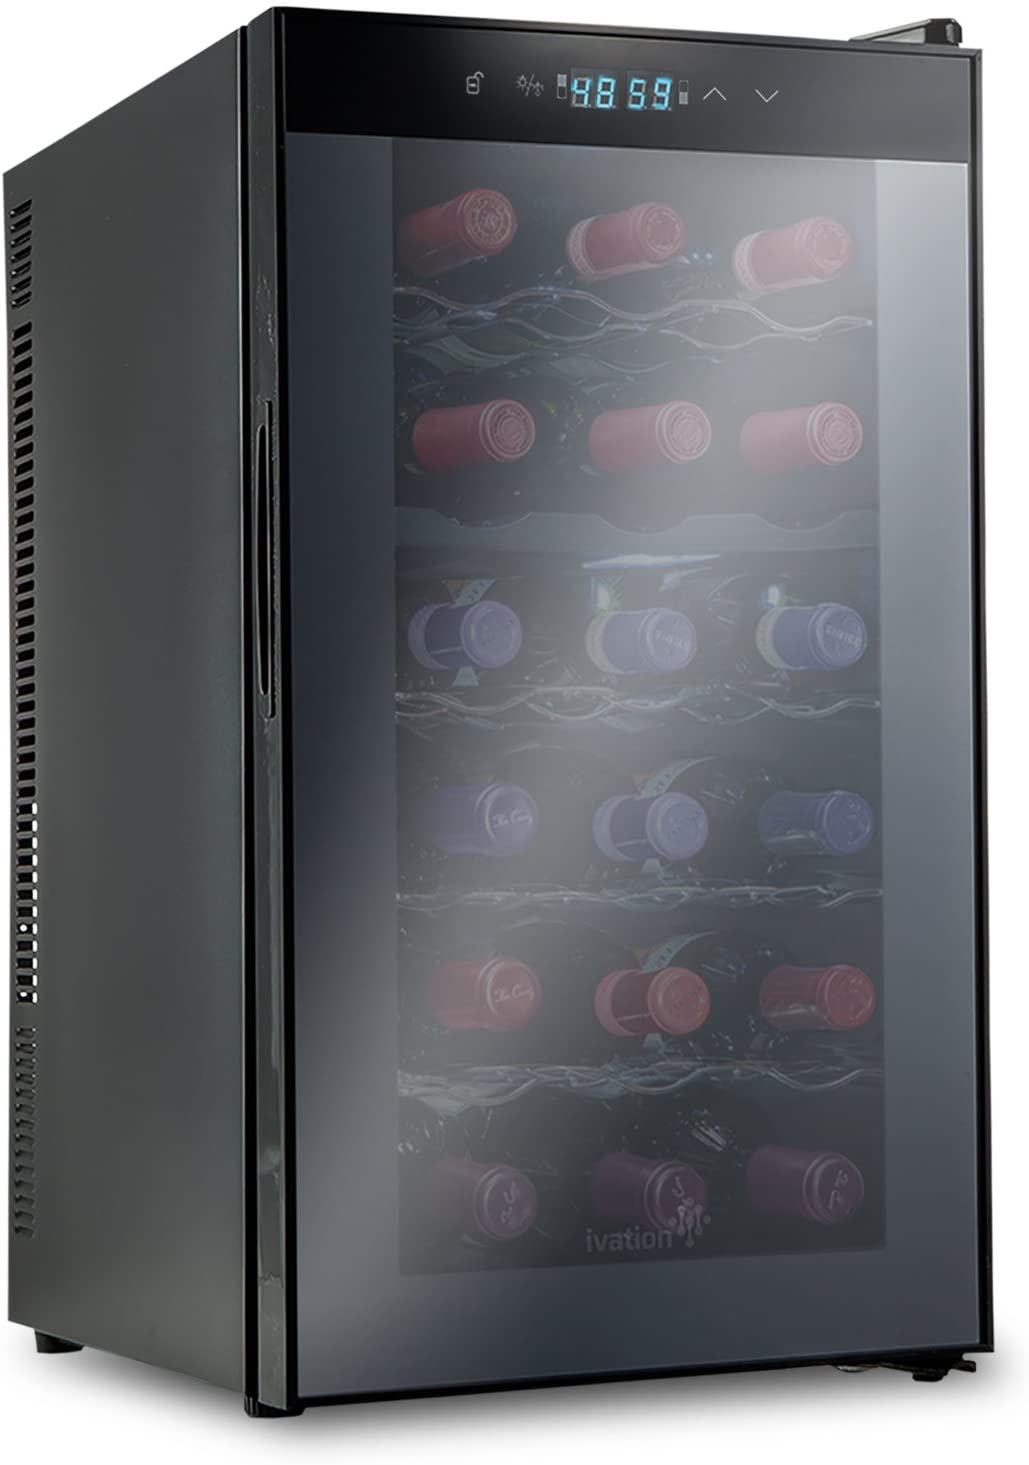 Ivation 18 Bottle Thermoelectric Wine Cooler (Best 18-Bottle Thermoelectric Wine Cooler)